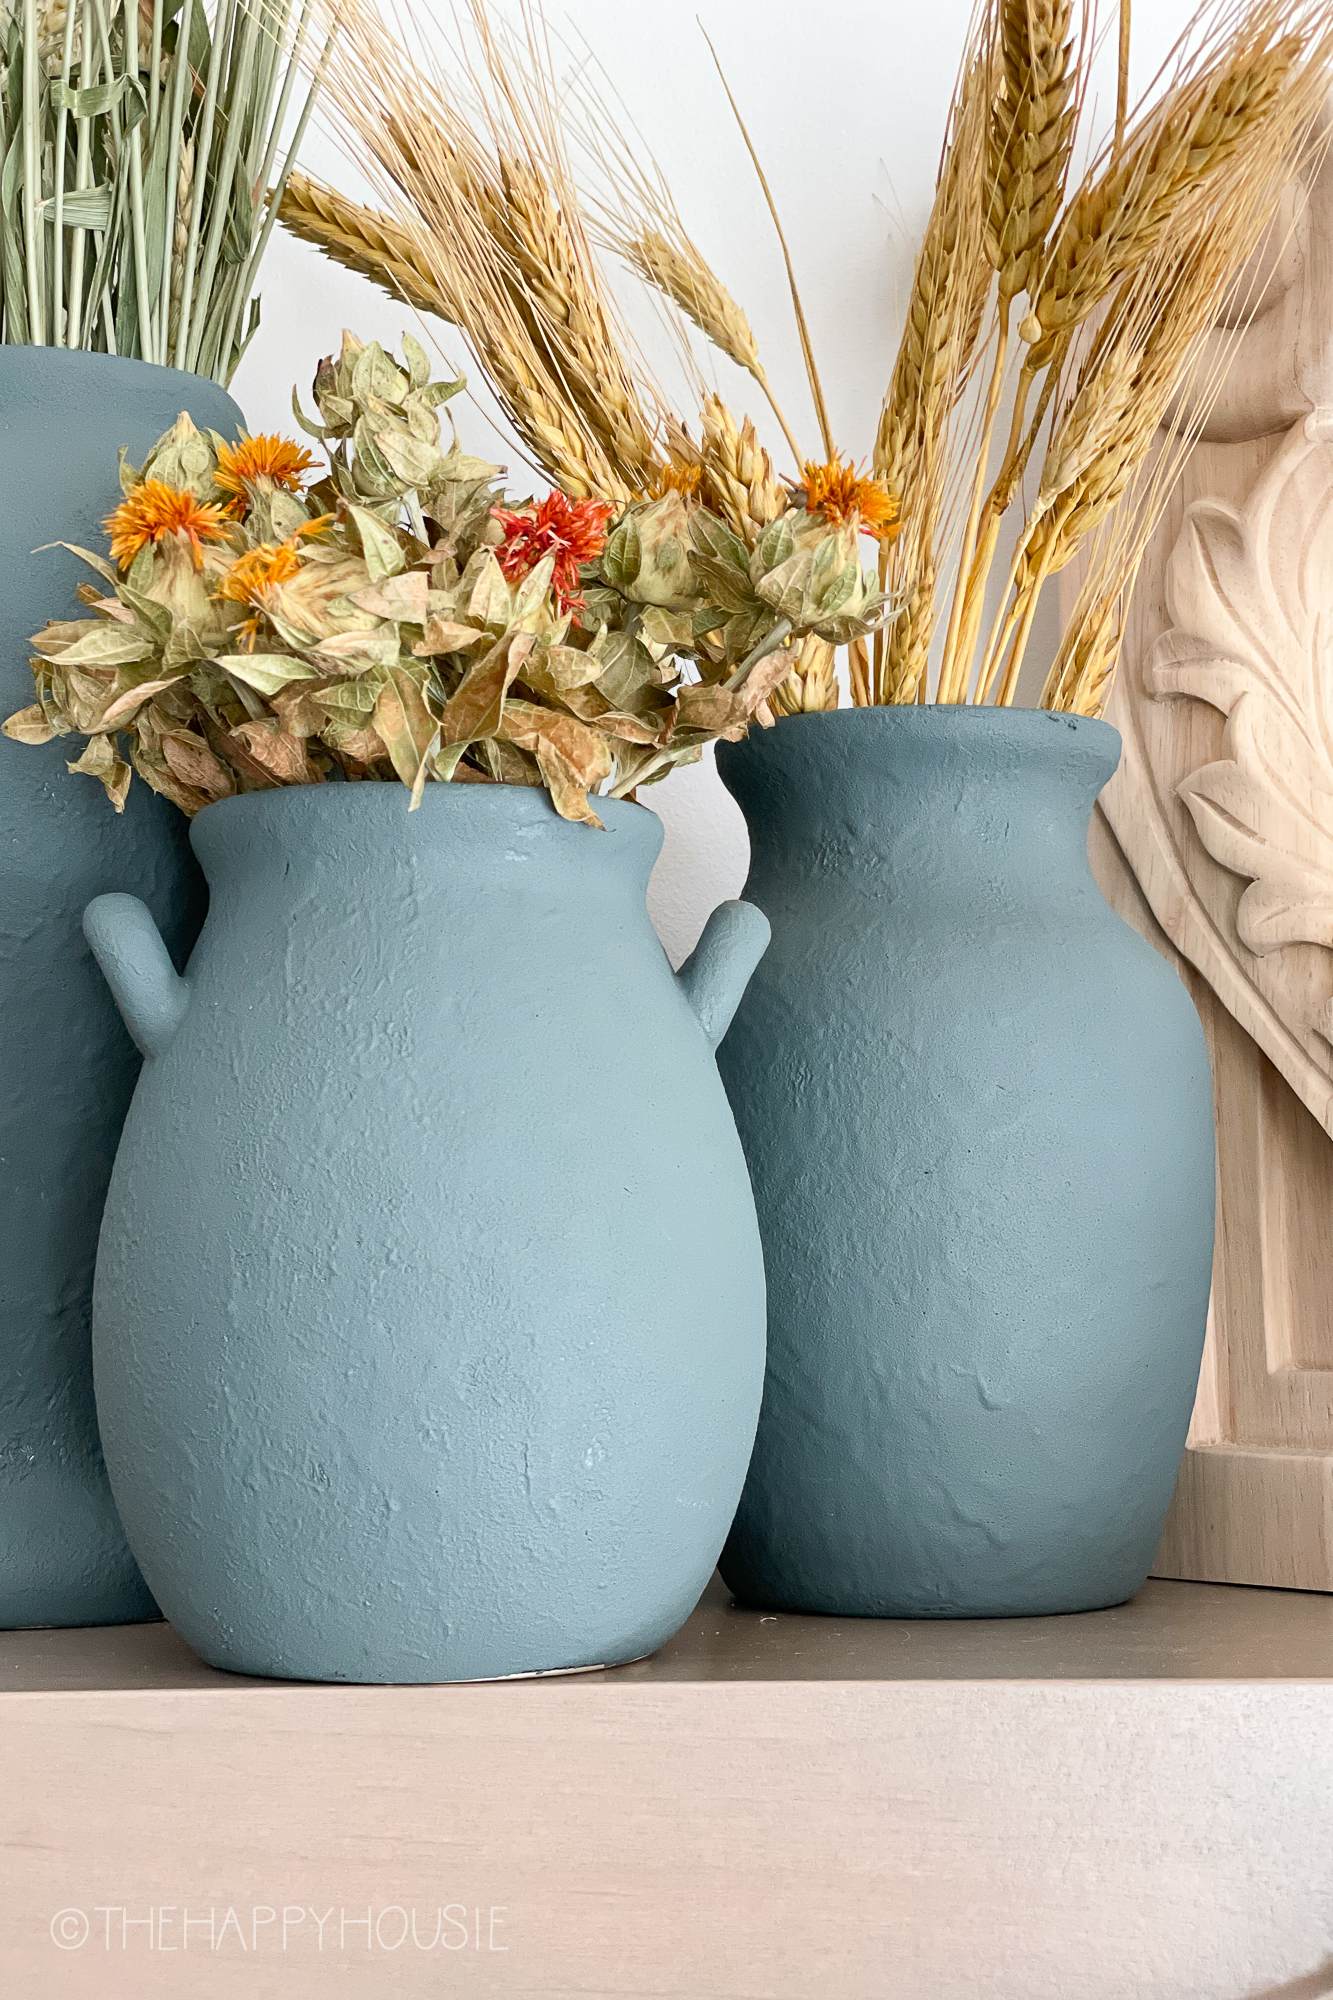 Blue/grey vases with wheat grass and dried flowers.